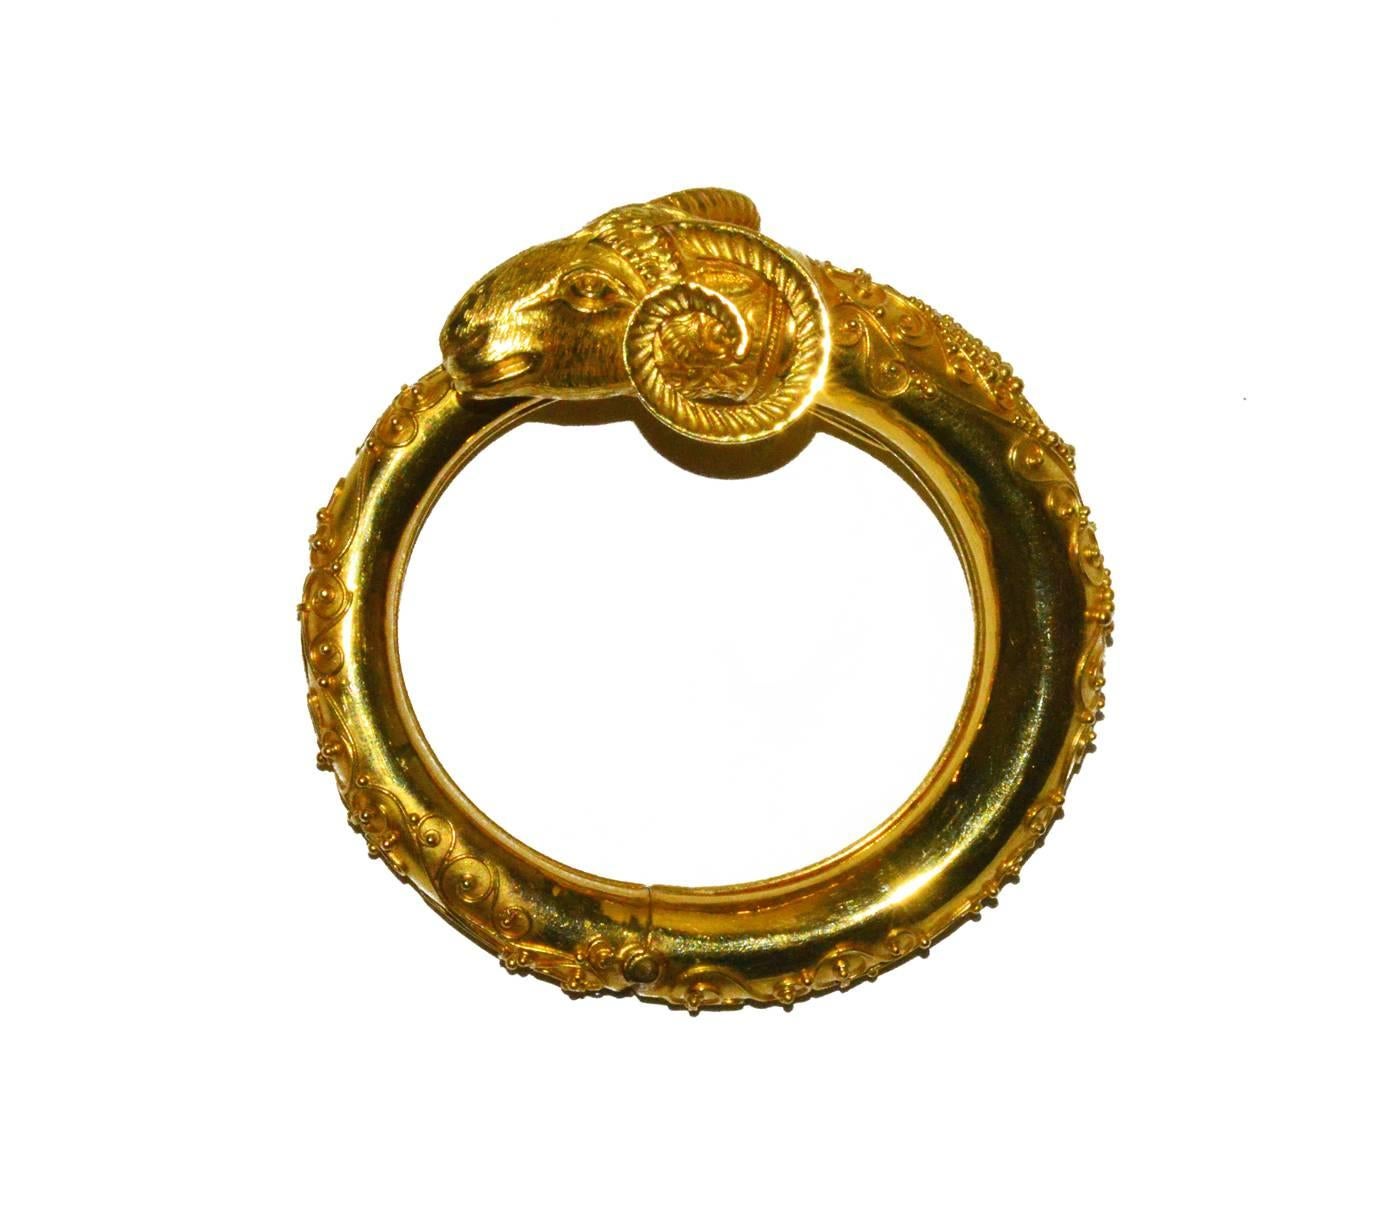 Lalaounis  Rare Amazing Large Ram GOLD Bracelet In Excellent Condition For Sale In Teaneck, NJ